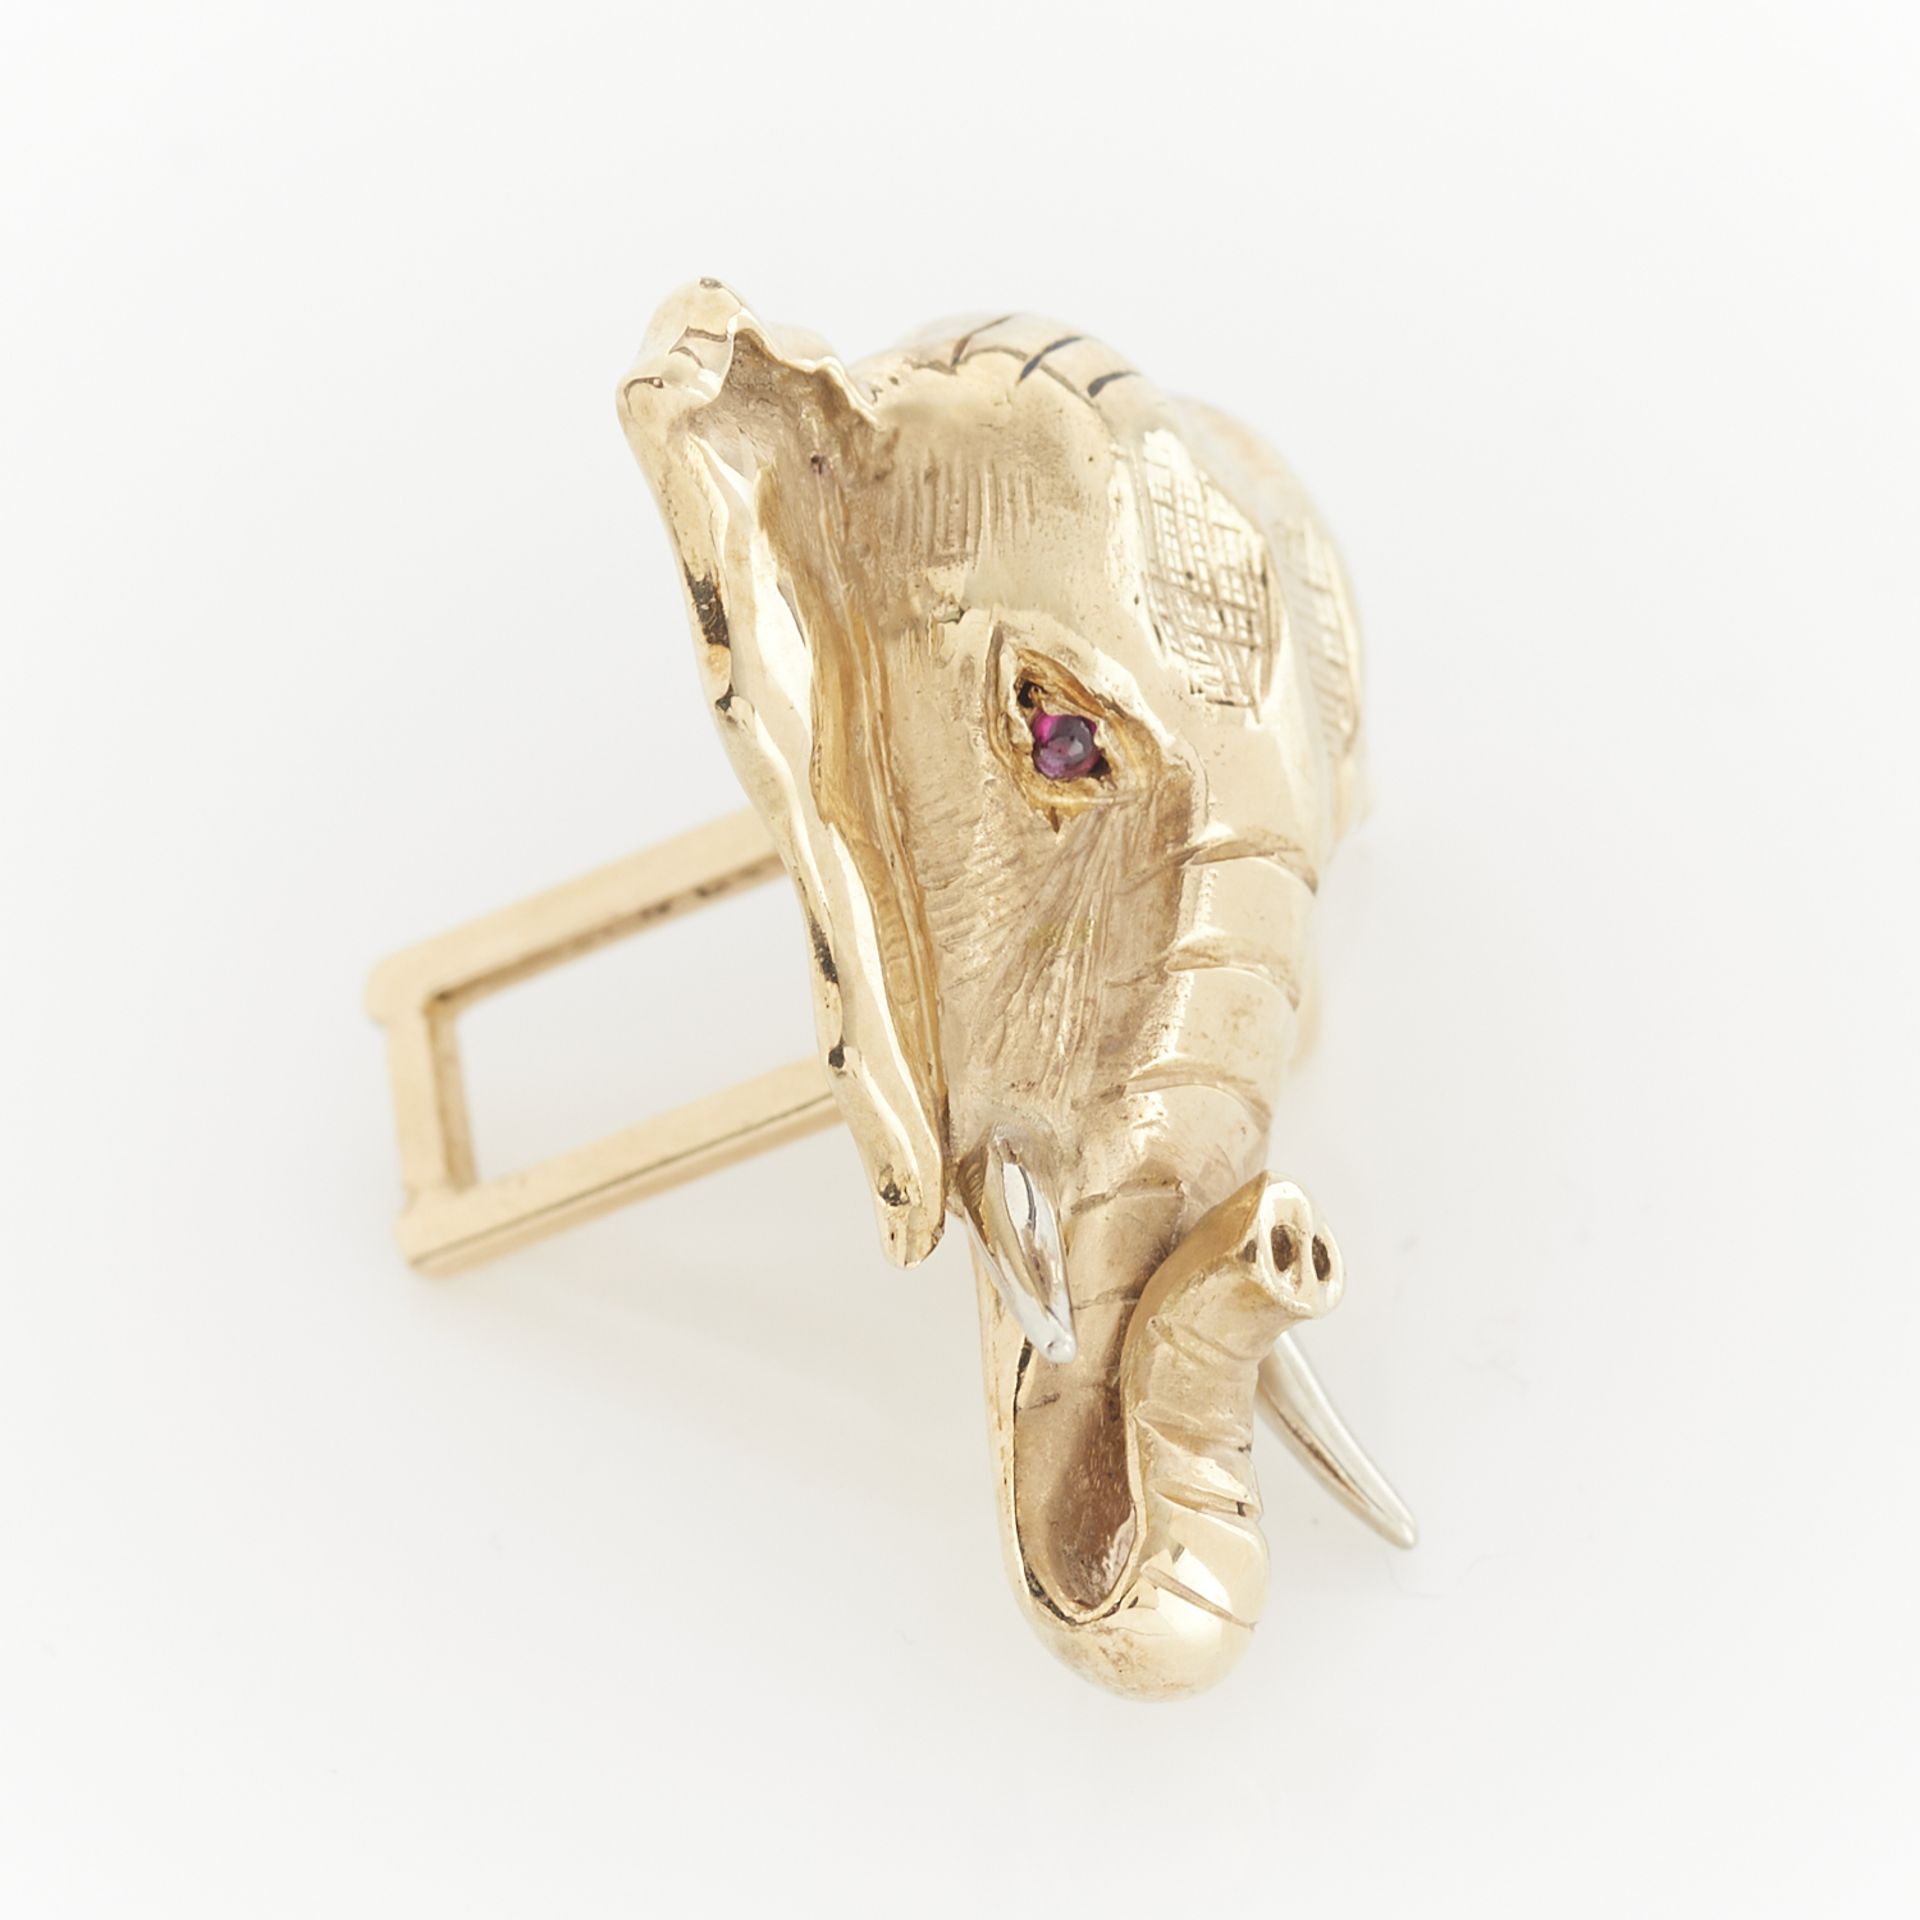 Pair of 14k Elephant Cuff Links - Image 3 of 9